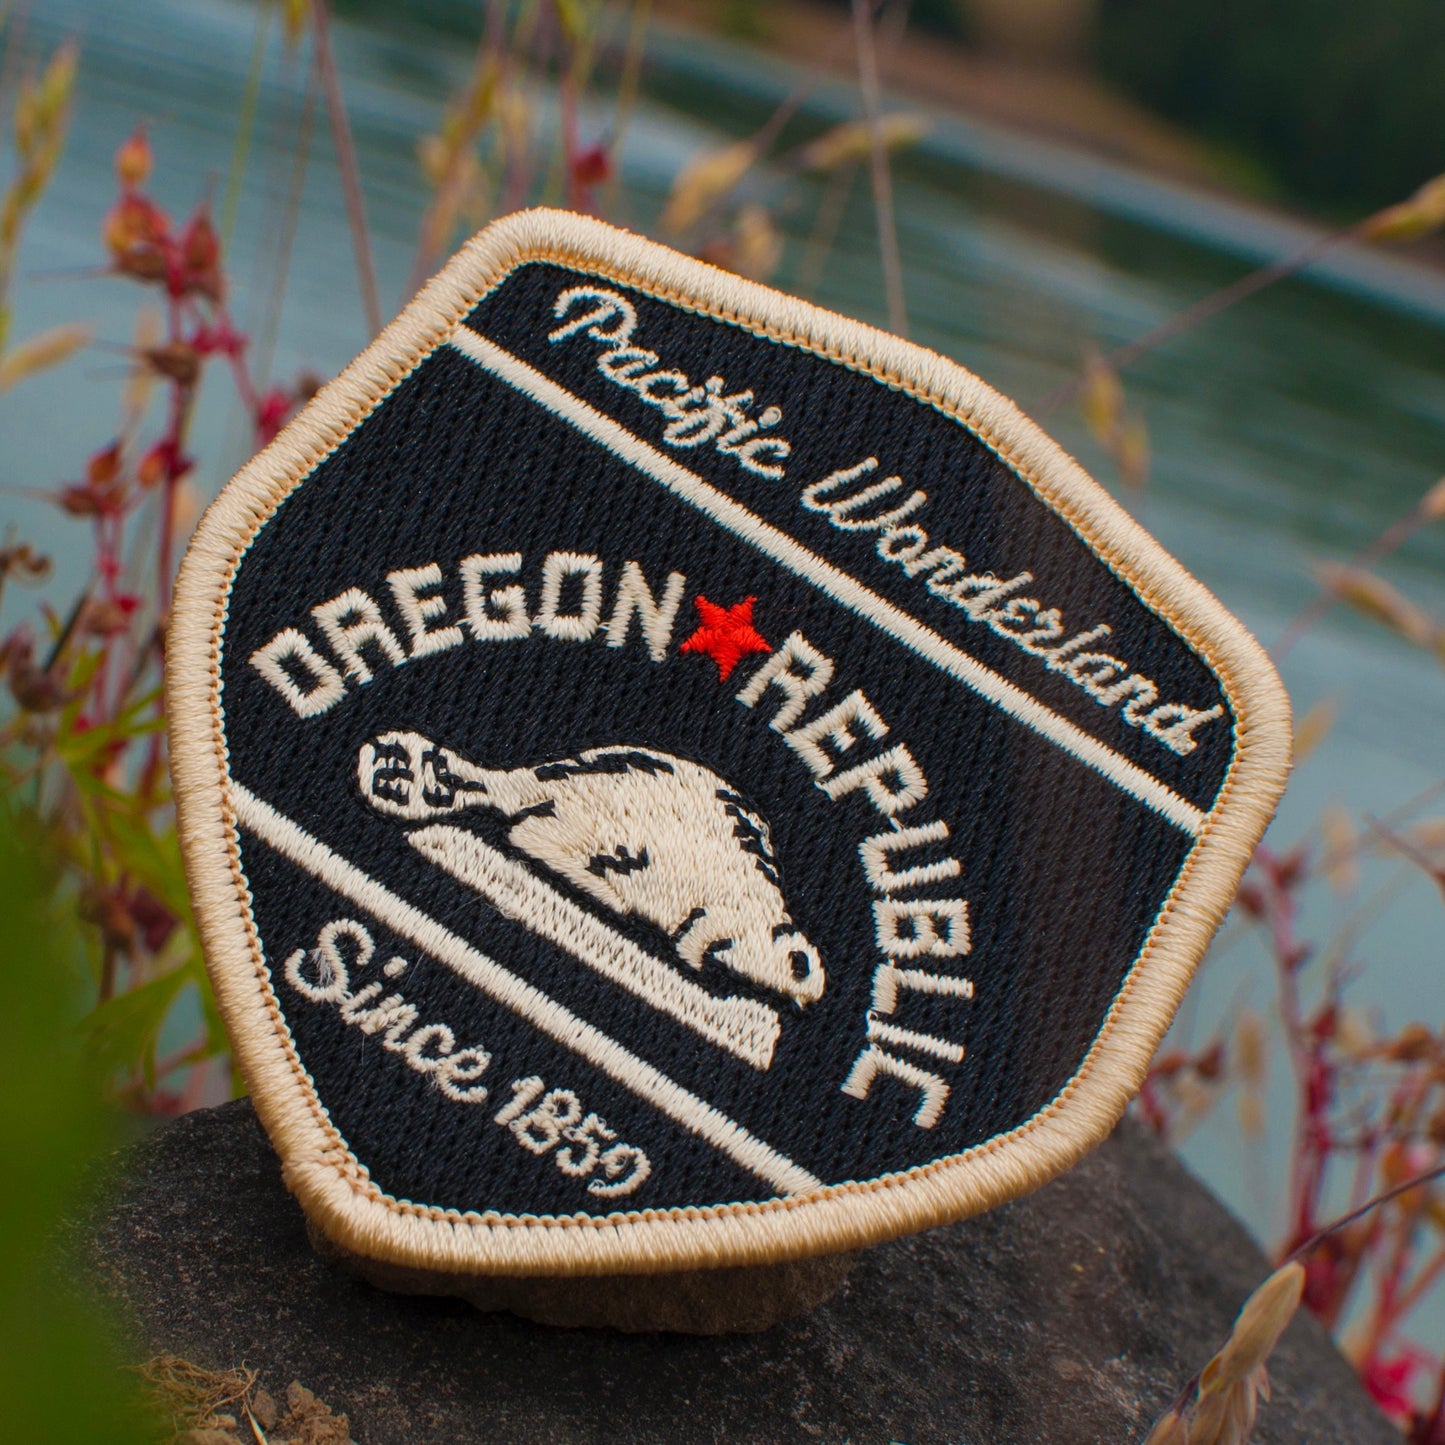 Oregon Republic Pacific Wonderland | Embroidered iron-on patch